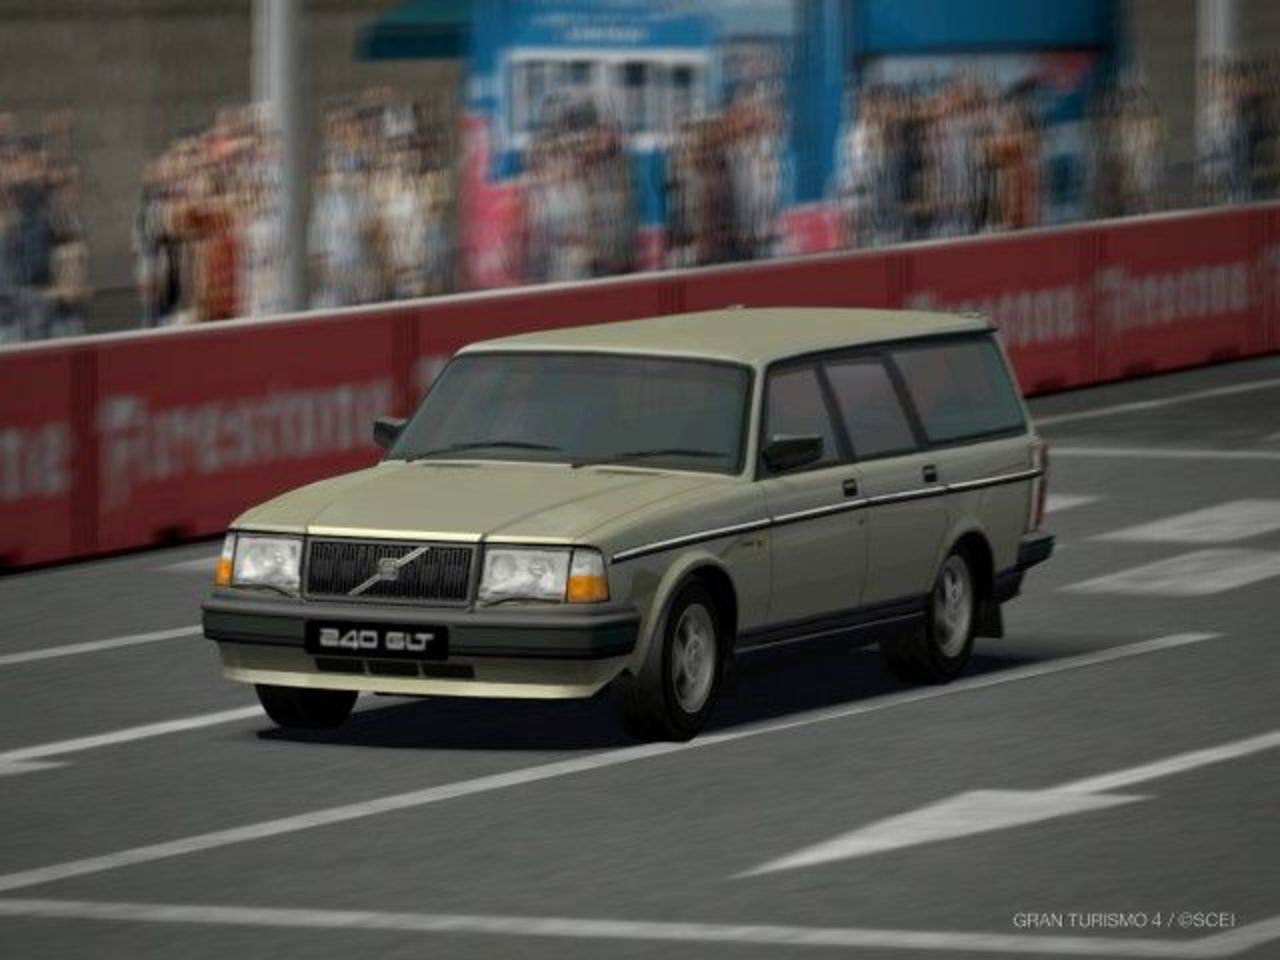 Volvo 240 GLT Estate '88. That image isn't from GT5, but it's the first one